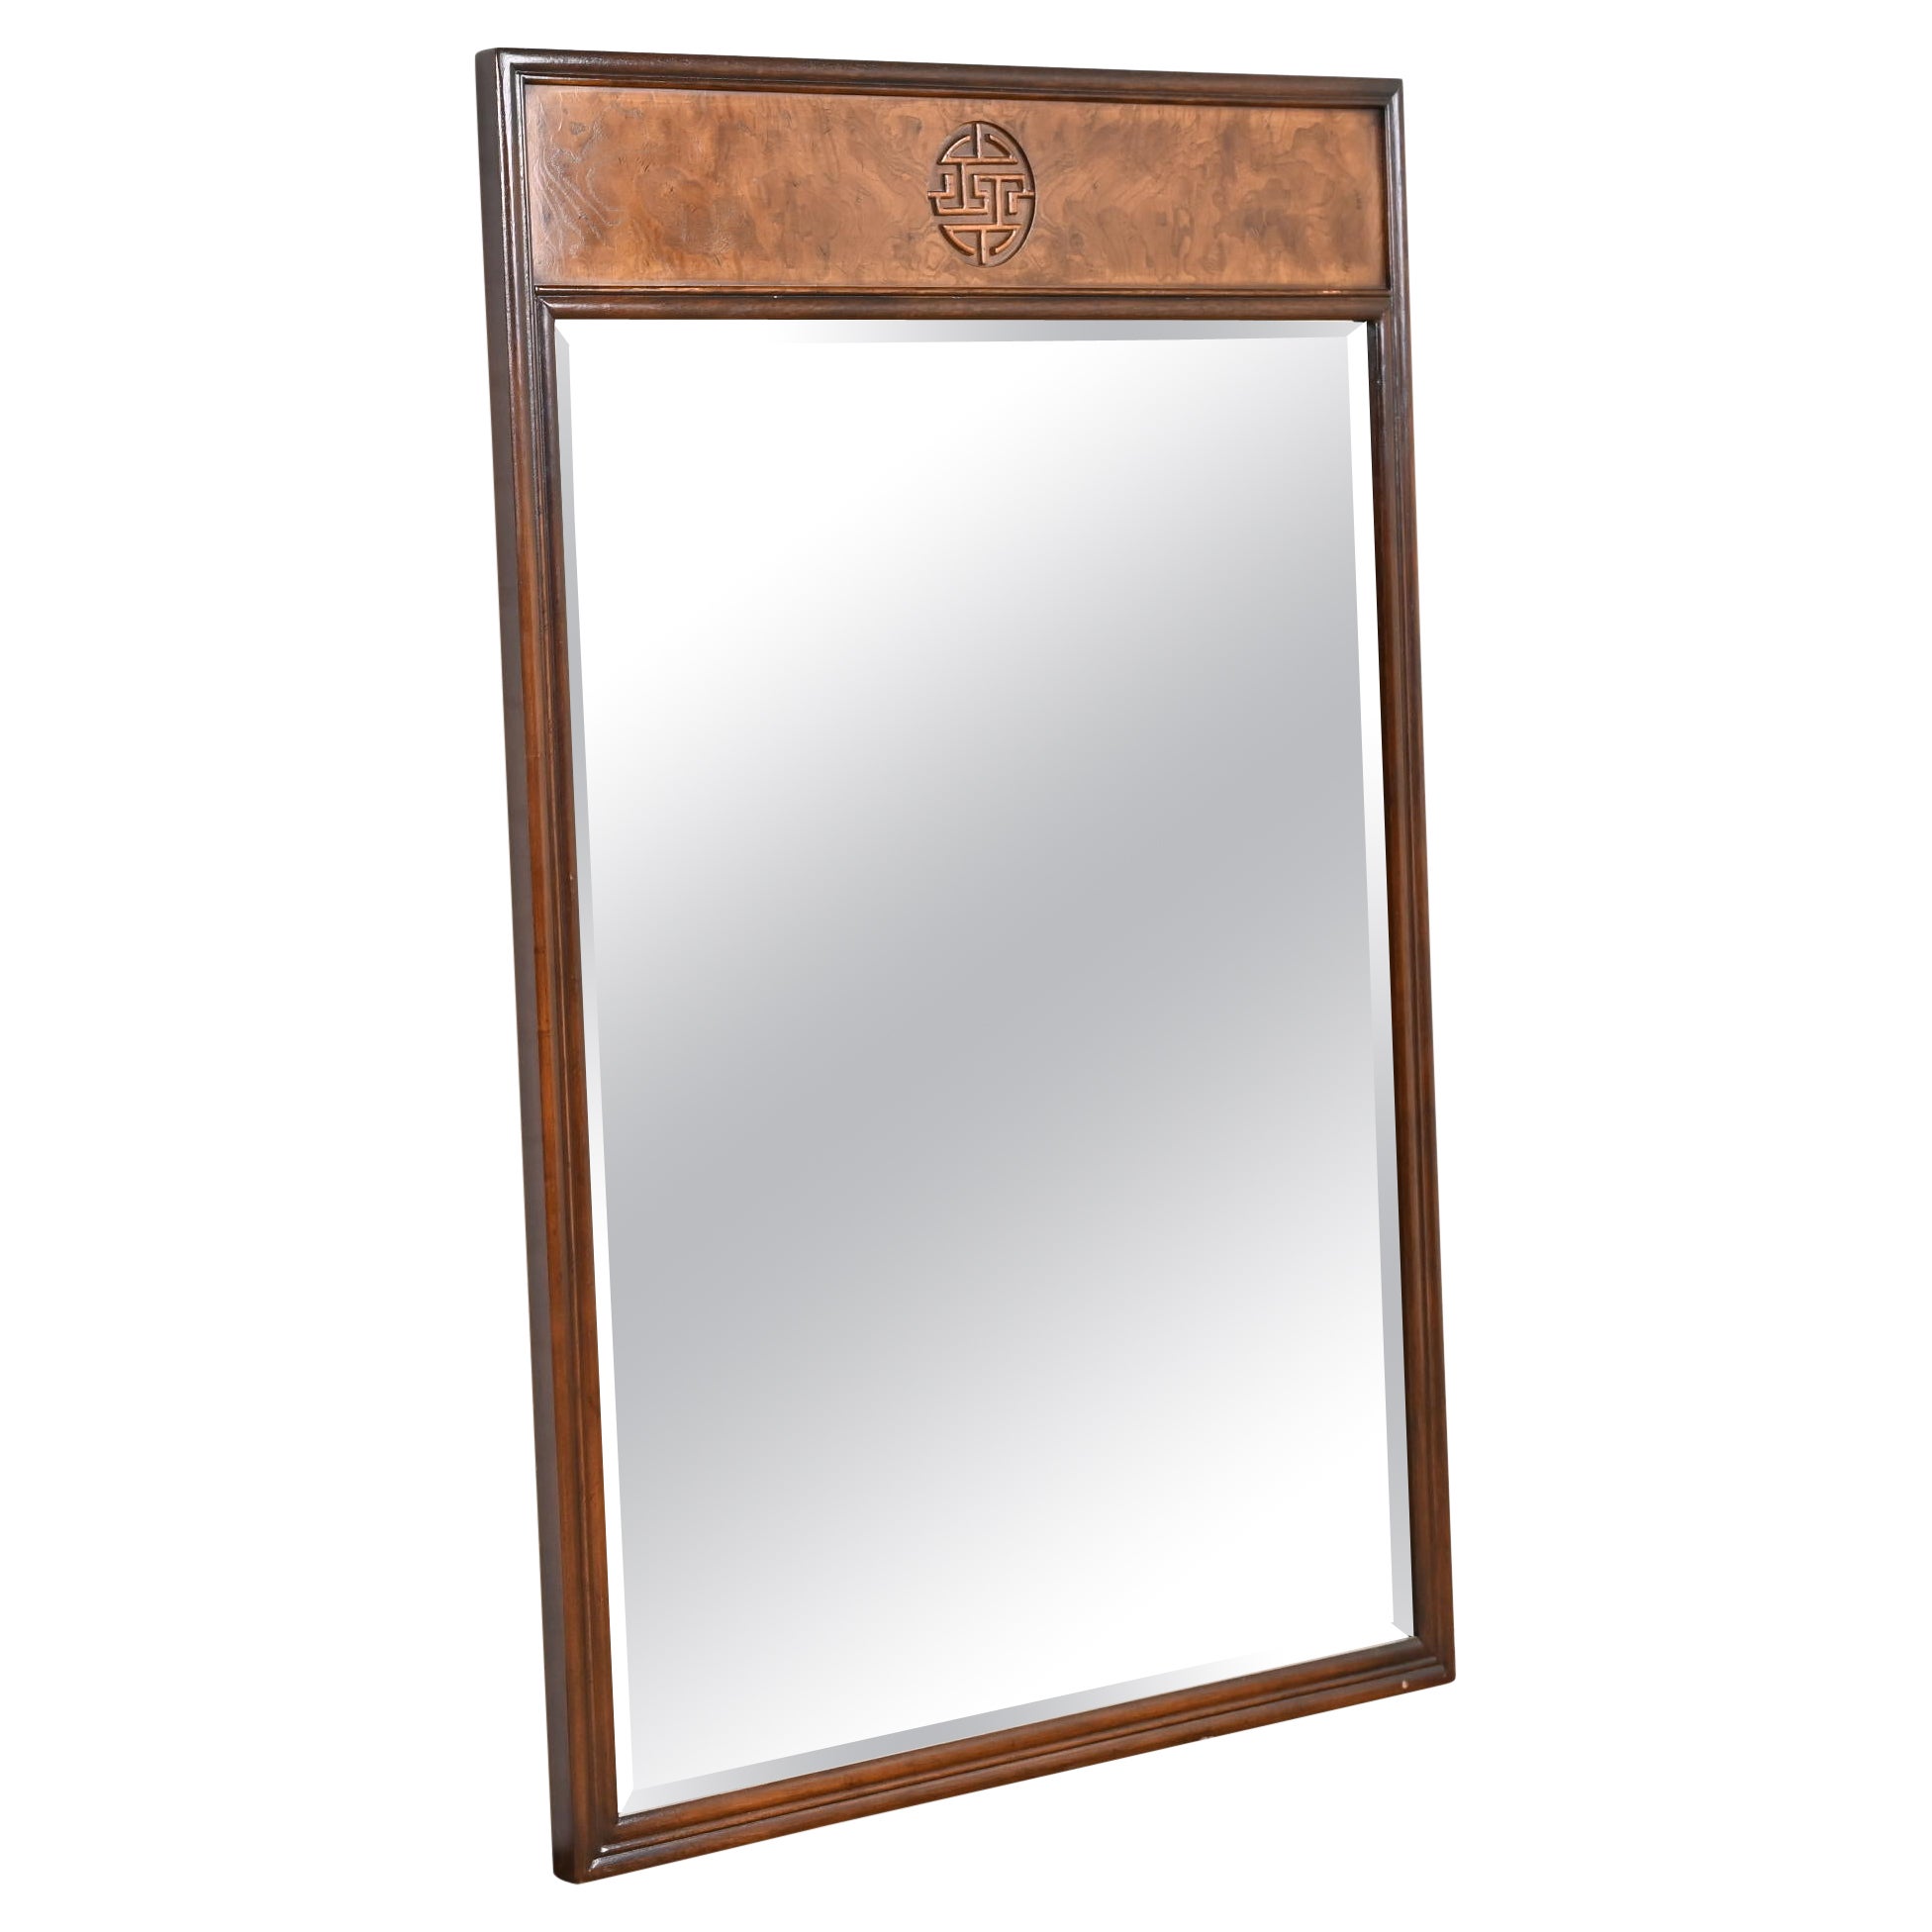 Drexel Heritage Hollywood Regency Chinoiserie Walnut and Burl Wood Wall Mirror